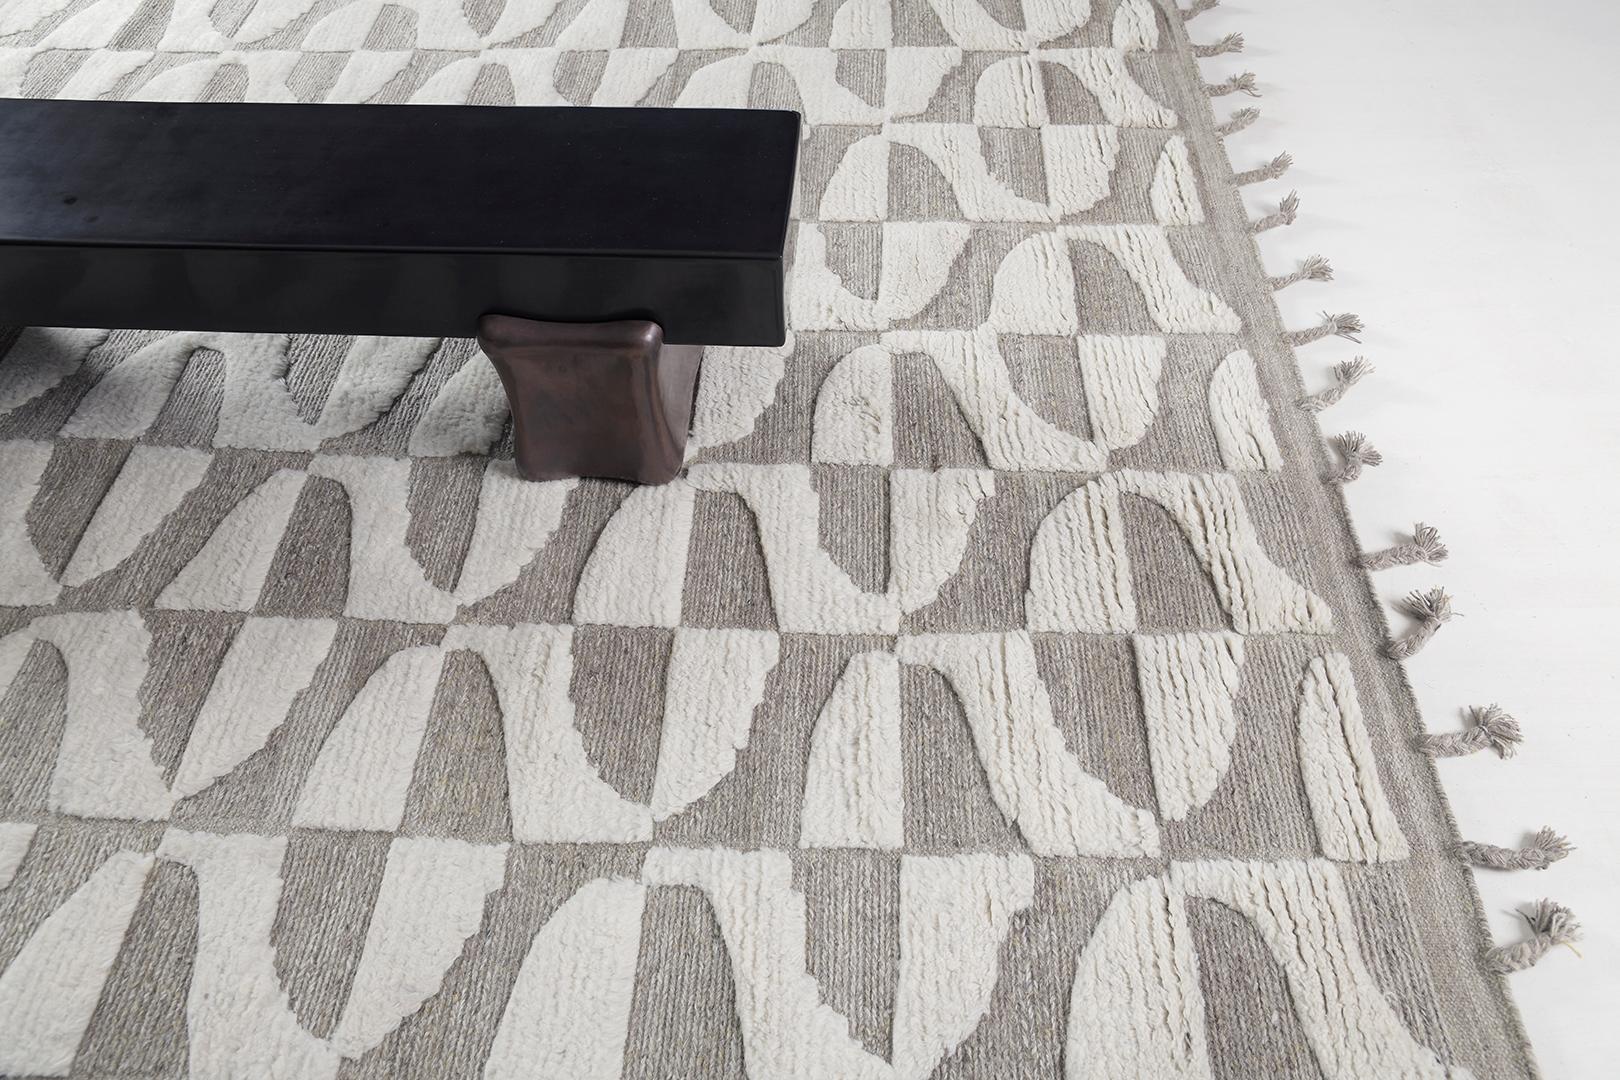 Egret’ features its embossed pile weave boasting elements that form together and create a visually impeccable design scheme. Impactful yet subtly elegant, this fascinating piece is a definite must-have. Sandpiper collection designed in Los Angeles